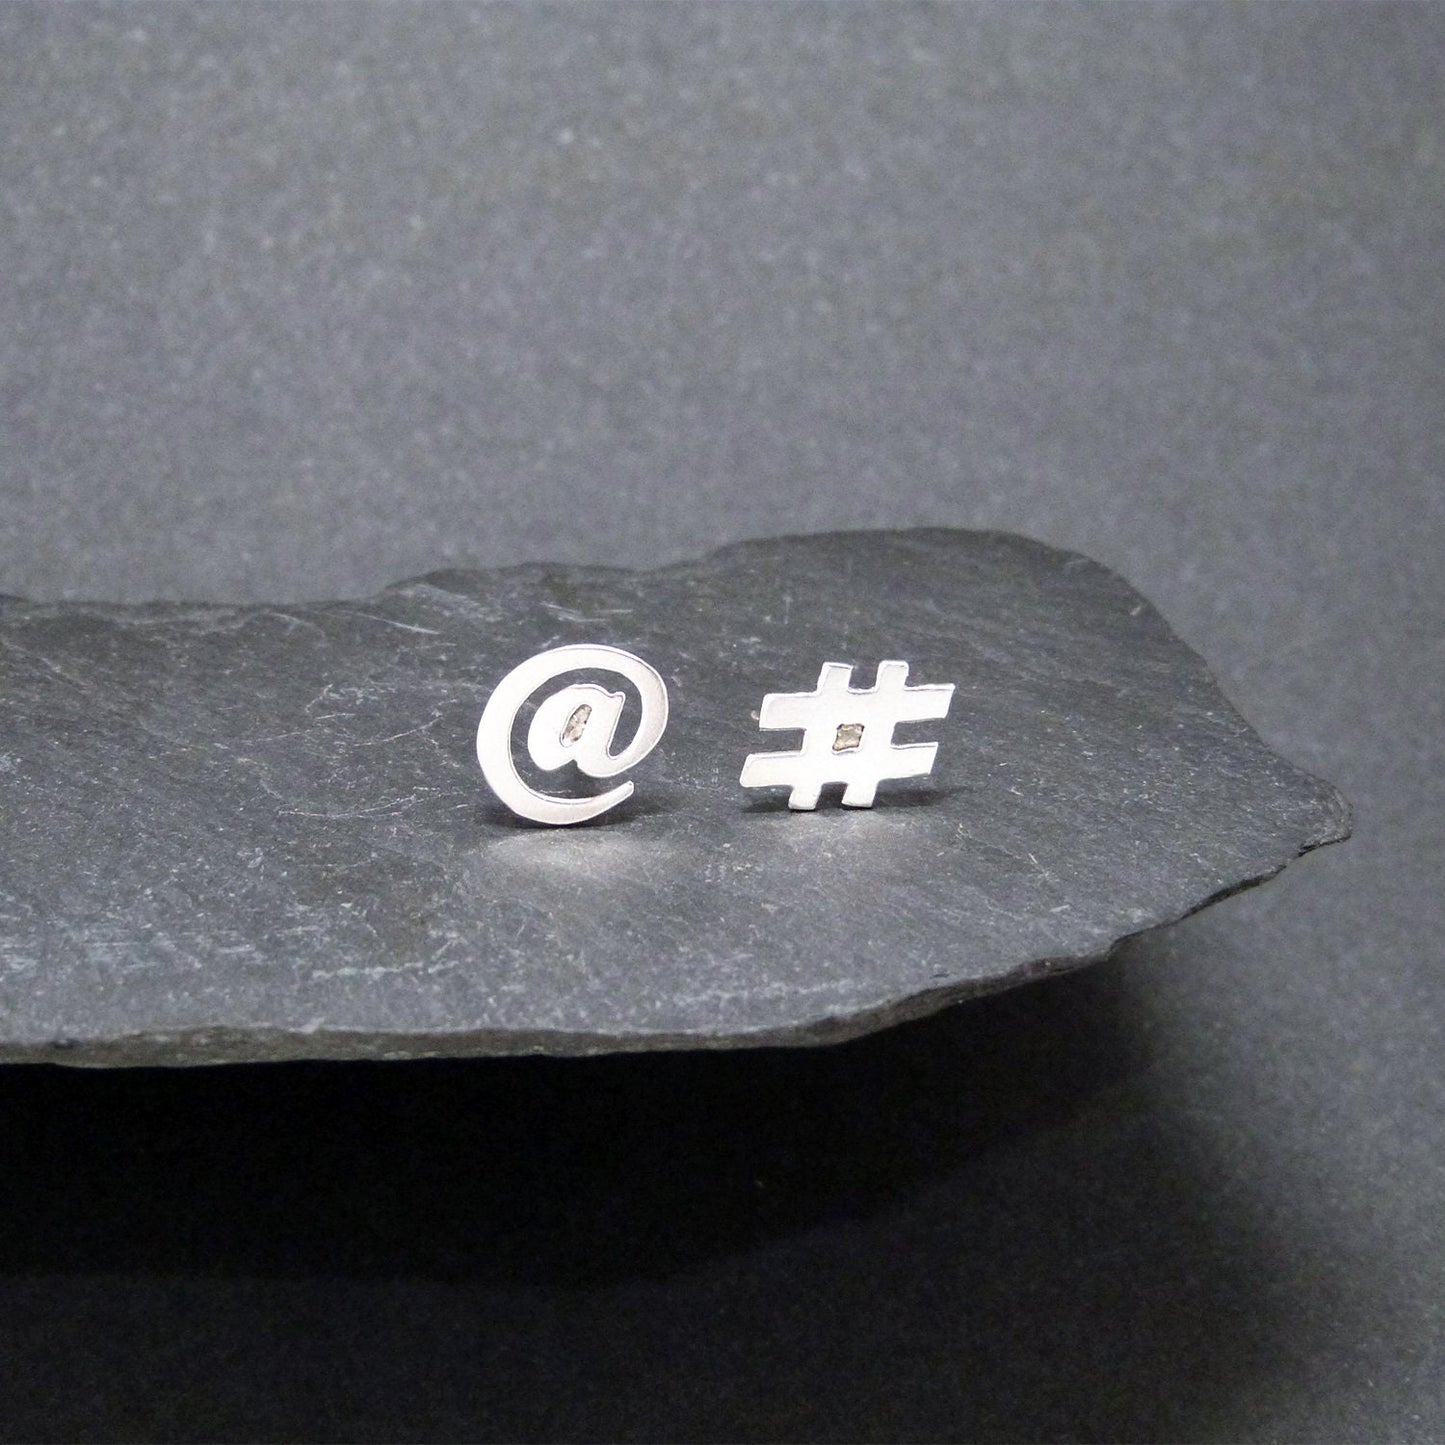 Twitter At sign and Hashtag earrings in 925 silver